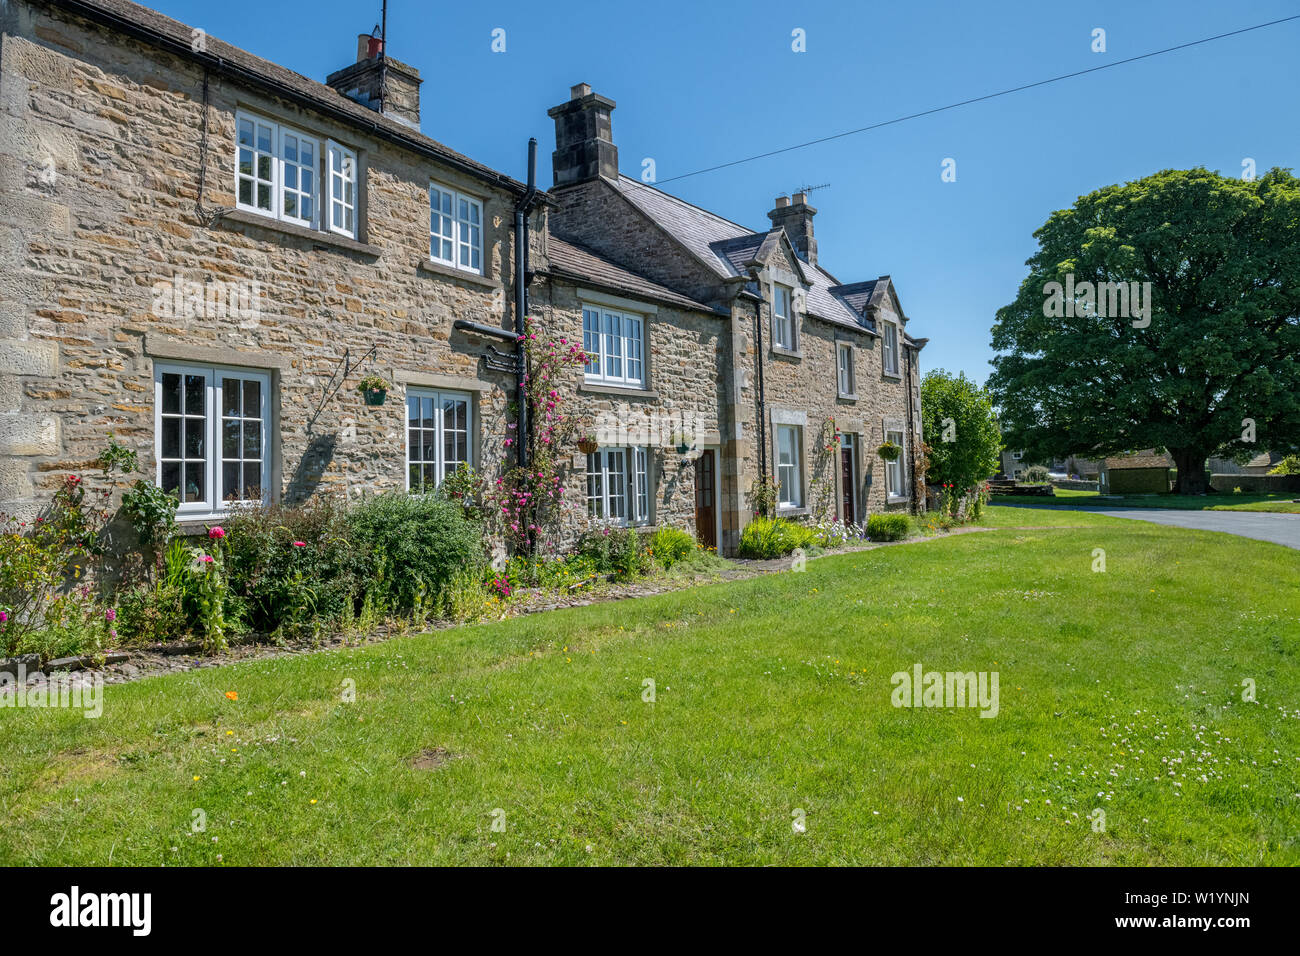 Local stone built housing in the Yorkshire Dales village of Redmire, England, UK. Stock Photo